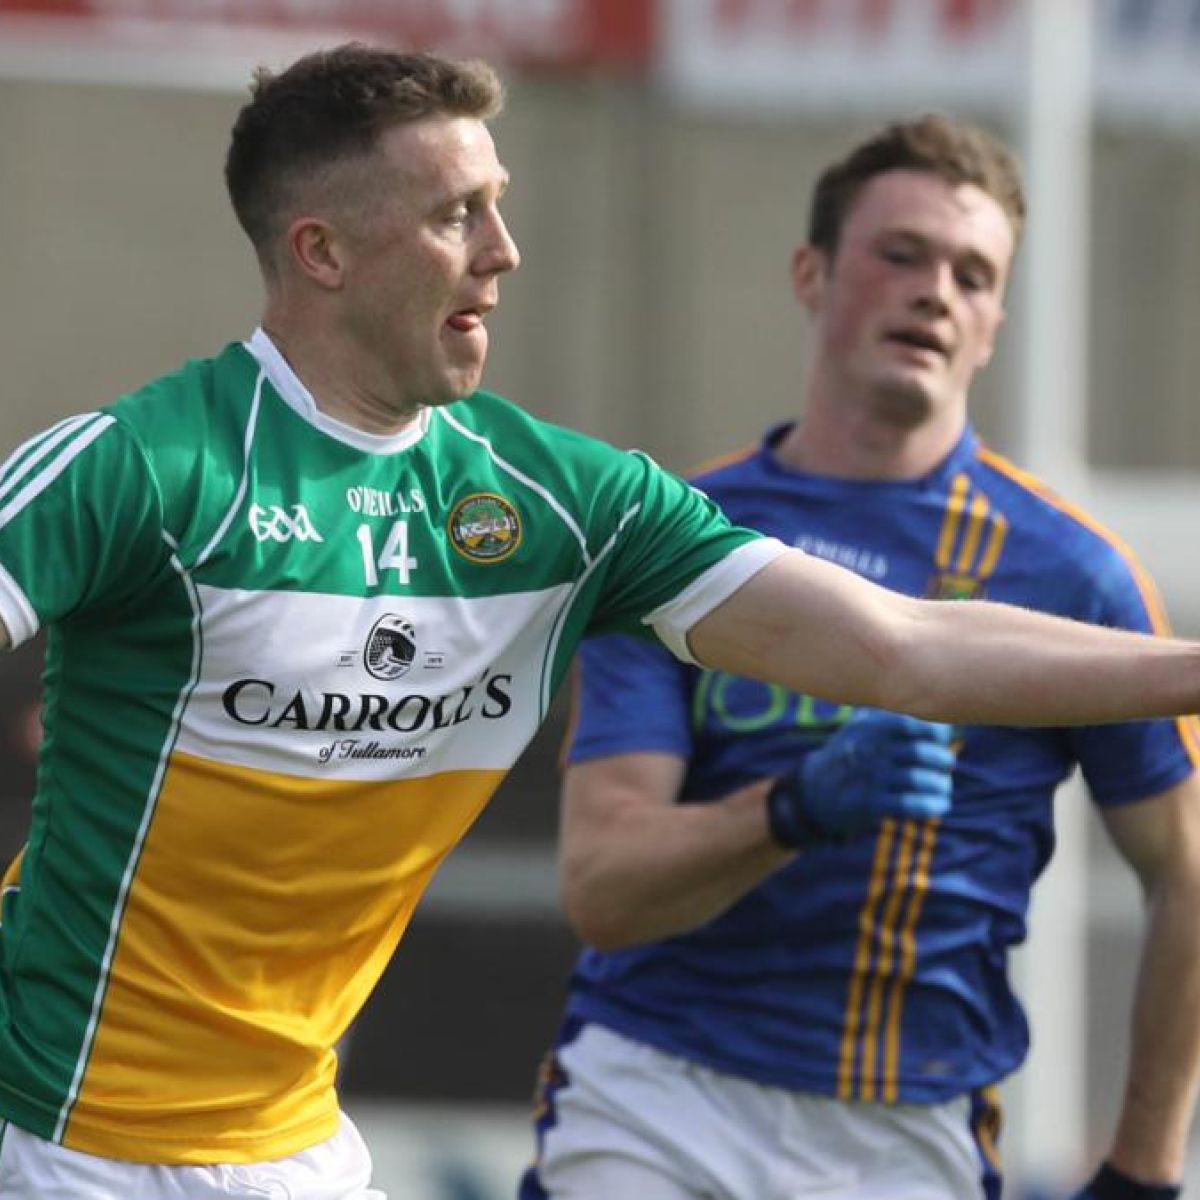 Offaly boss learned he was axed after his wife saw the news 